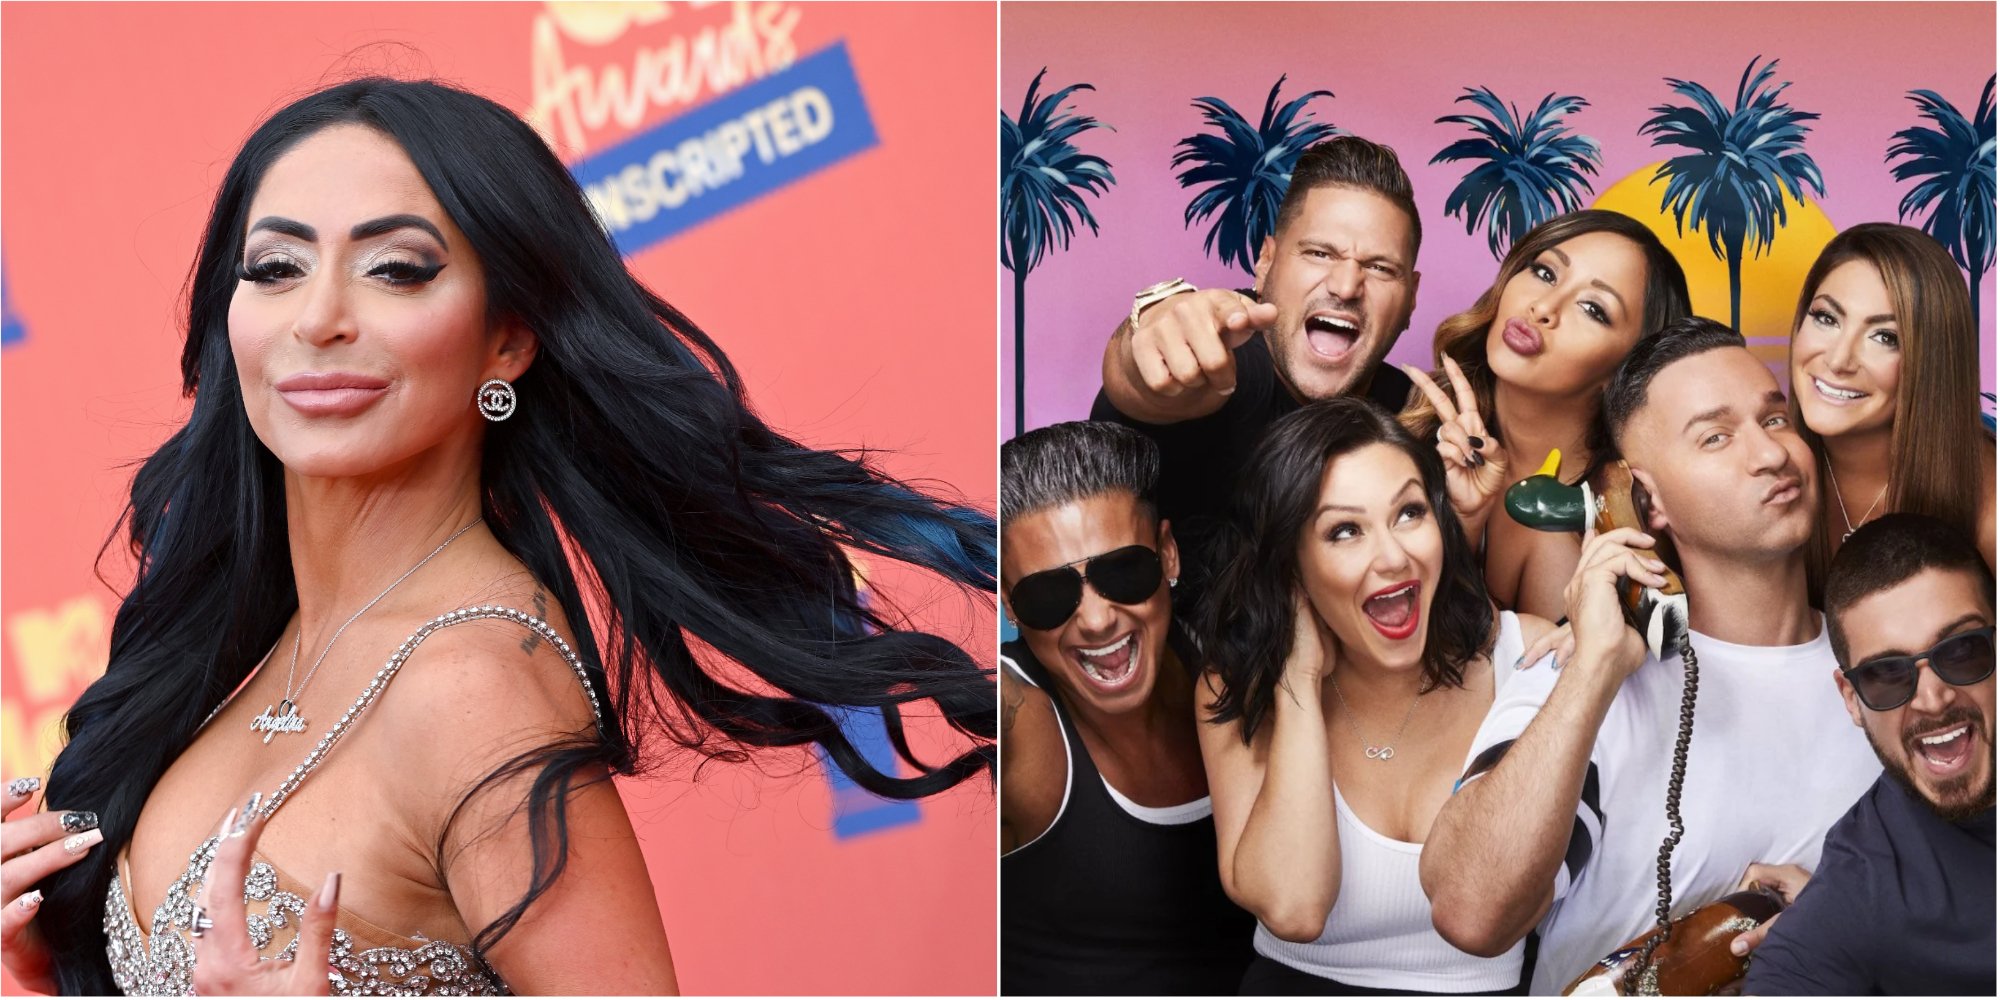 ‘Jersey Shore’ Fans Fed up With Cast Members ‘Ganging up’ on Angelina Pivarnick, Saying None of Them Are ‘Angels’